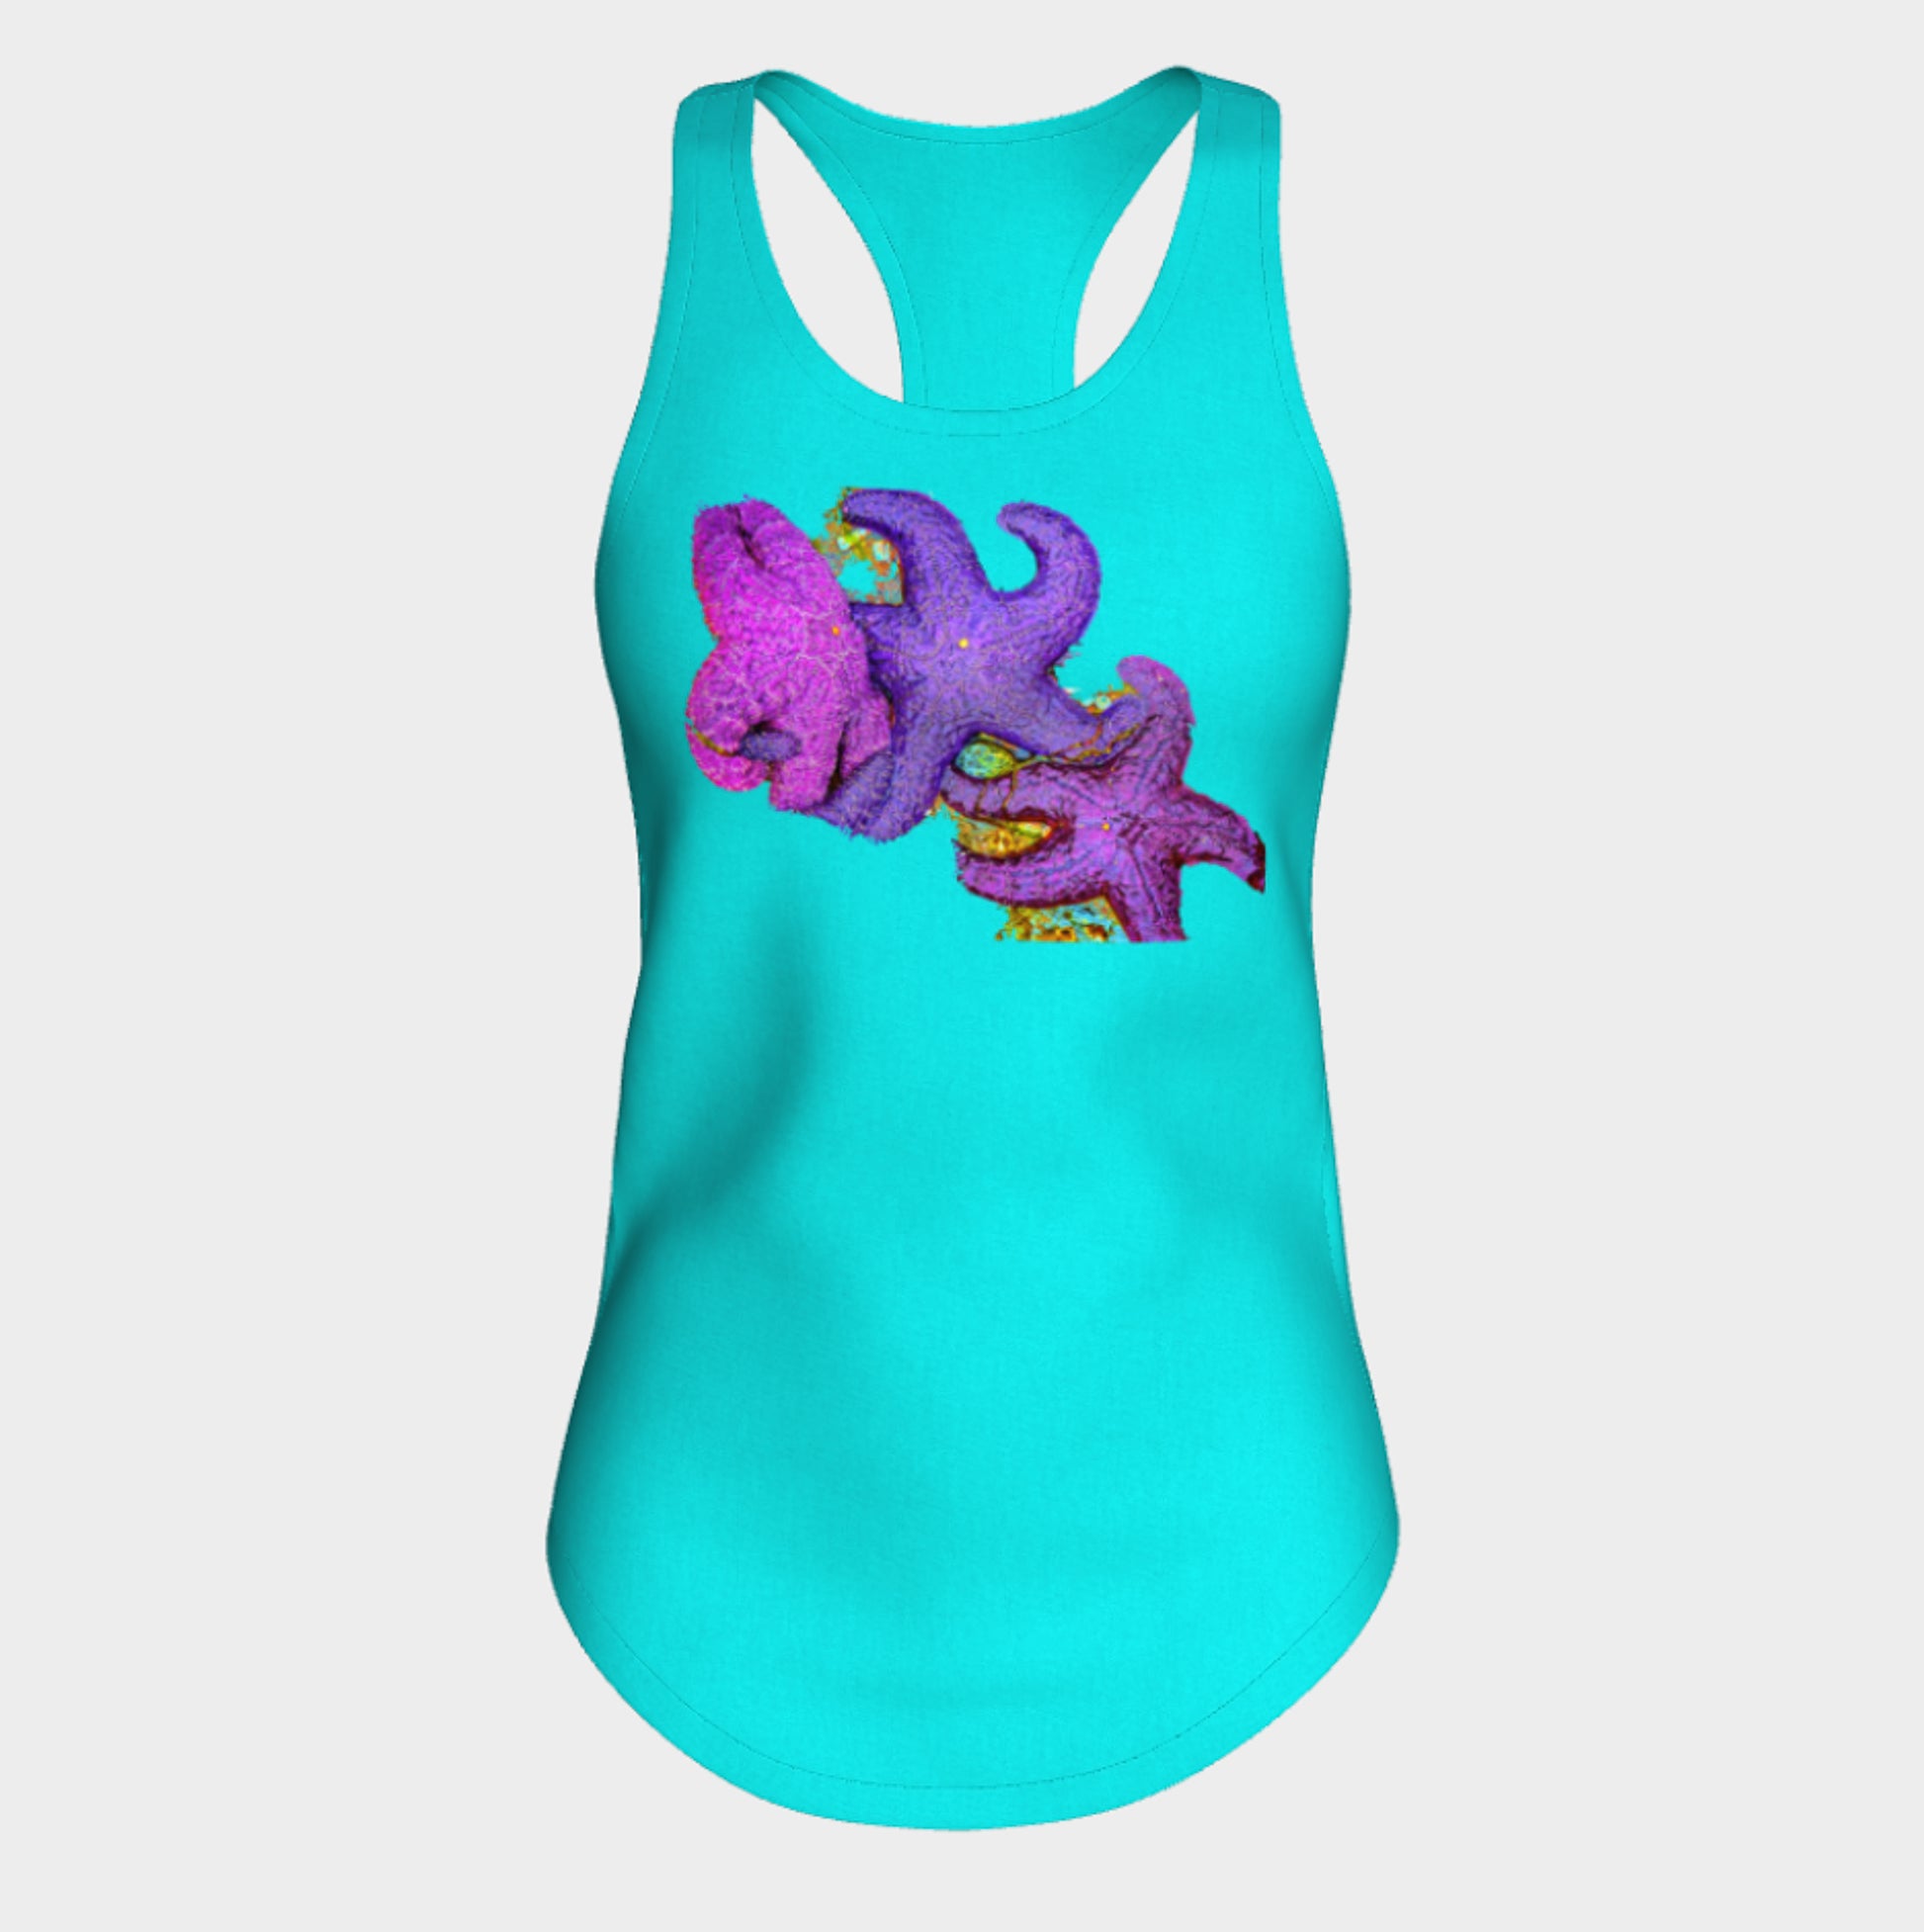 Starfish Cluster Racerback Tank Top  Excellent choice for the summer or for working out.   Made from 60% spun cotton and 40% poly for a mix of comfort and performance, you get it all (including my photography and digital art) with this custom printed racerback tank top.   Van Isle Goddess Next Level racerback tank top will quickly become you go-to tank top because of the super comfy fit!